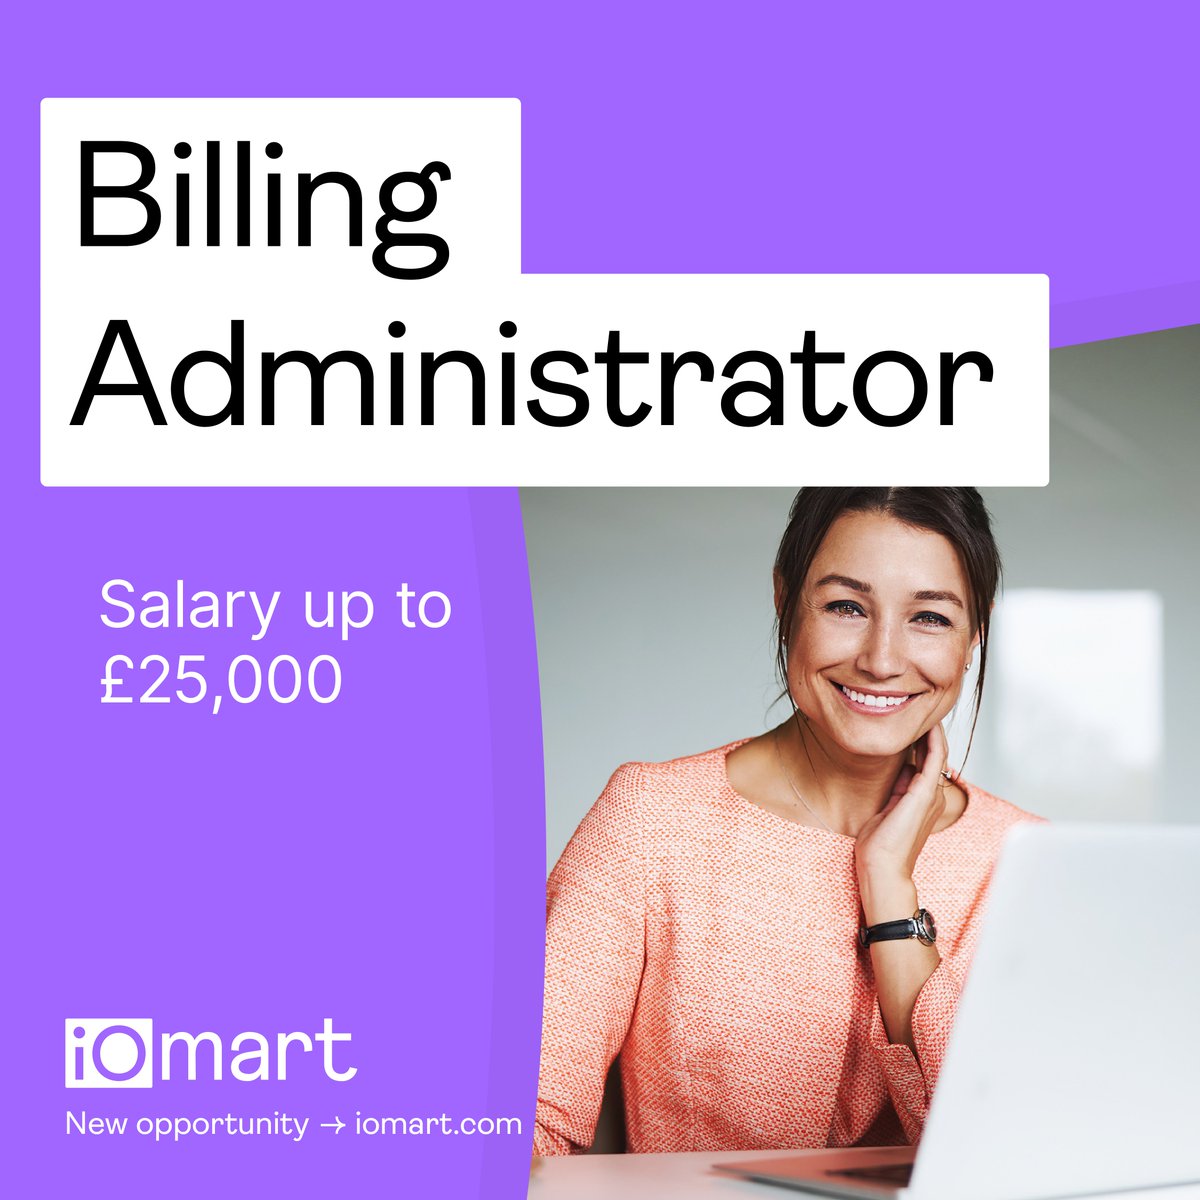 We're looking for a Billing Administrator to join our #finance team and process customer billing and manage correspondence to the billing team. Sound like you? We'd love to chat. Apply now ➡️ careers-iomart.icims.com/jobs/1693/bill…

#careers #hiring #techjobs #financejobs #jobopening